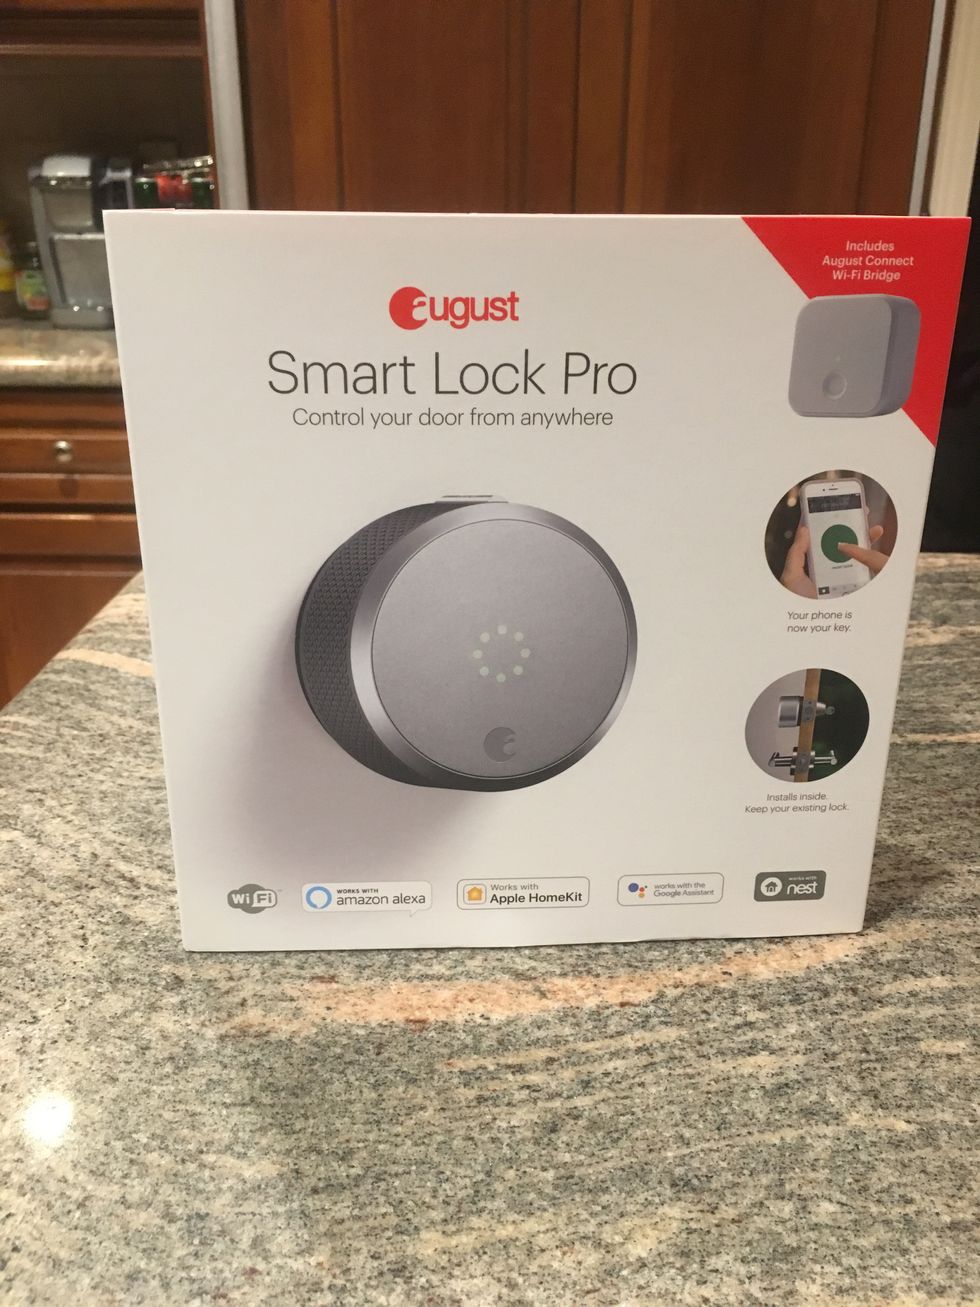 Picture of August Smart Lock Pro box on a kitchen counter.